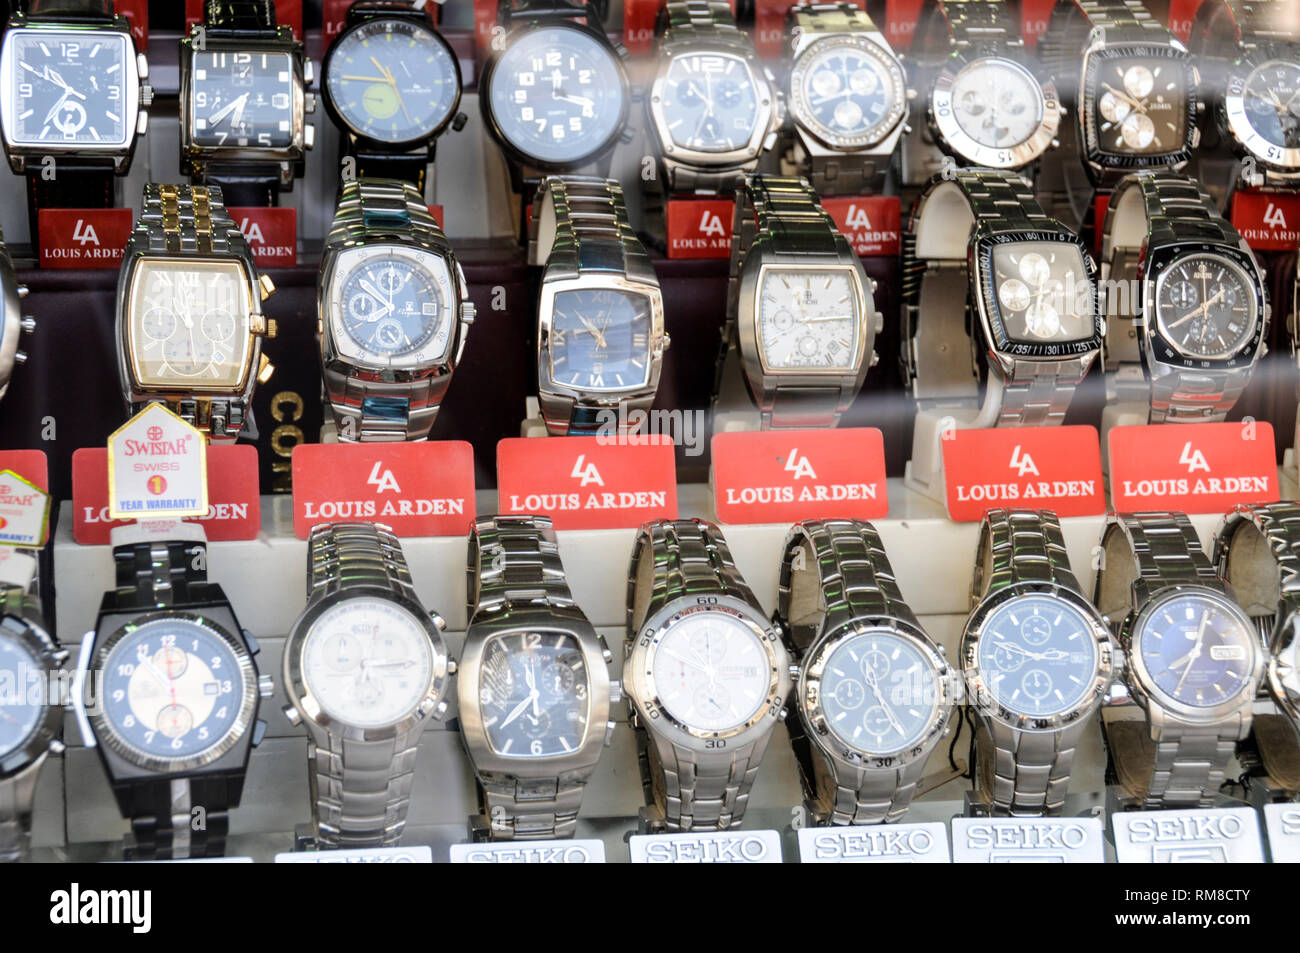 A display of cheap wrist watches on sale at a market in Dubai in the ...